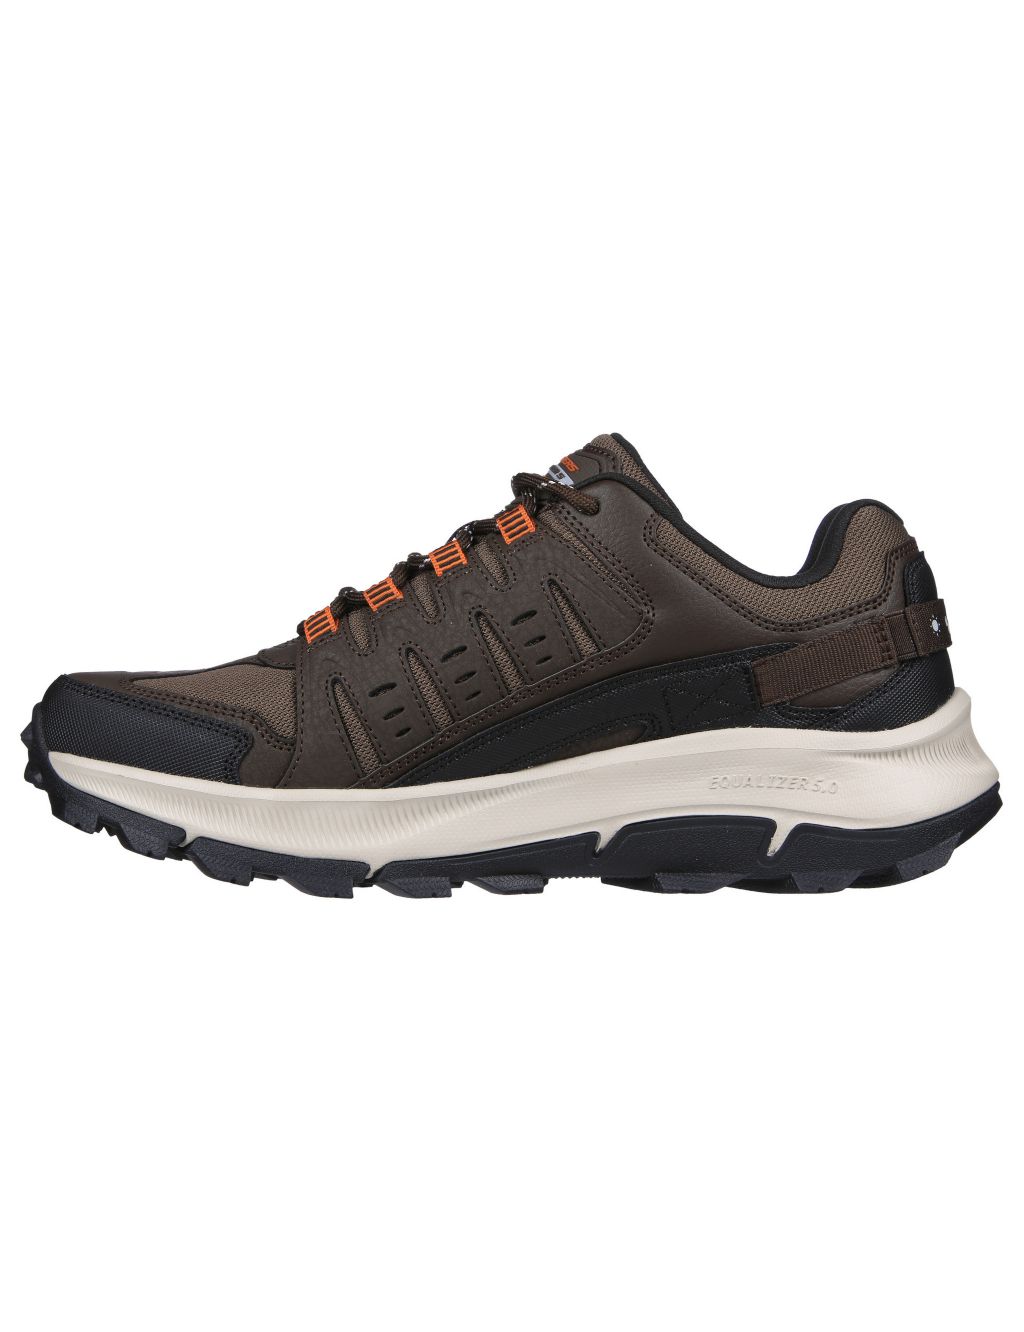 Equalizer 5.0 Trail Solix Lace Up Trainers image 5